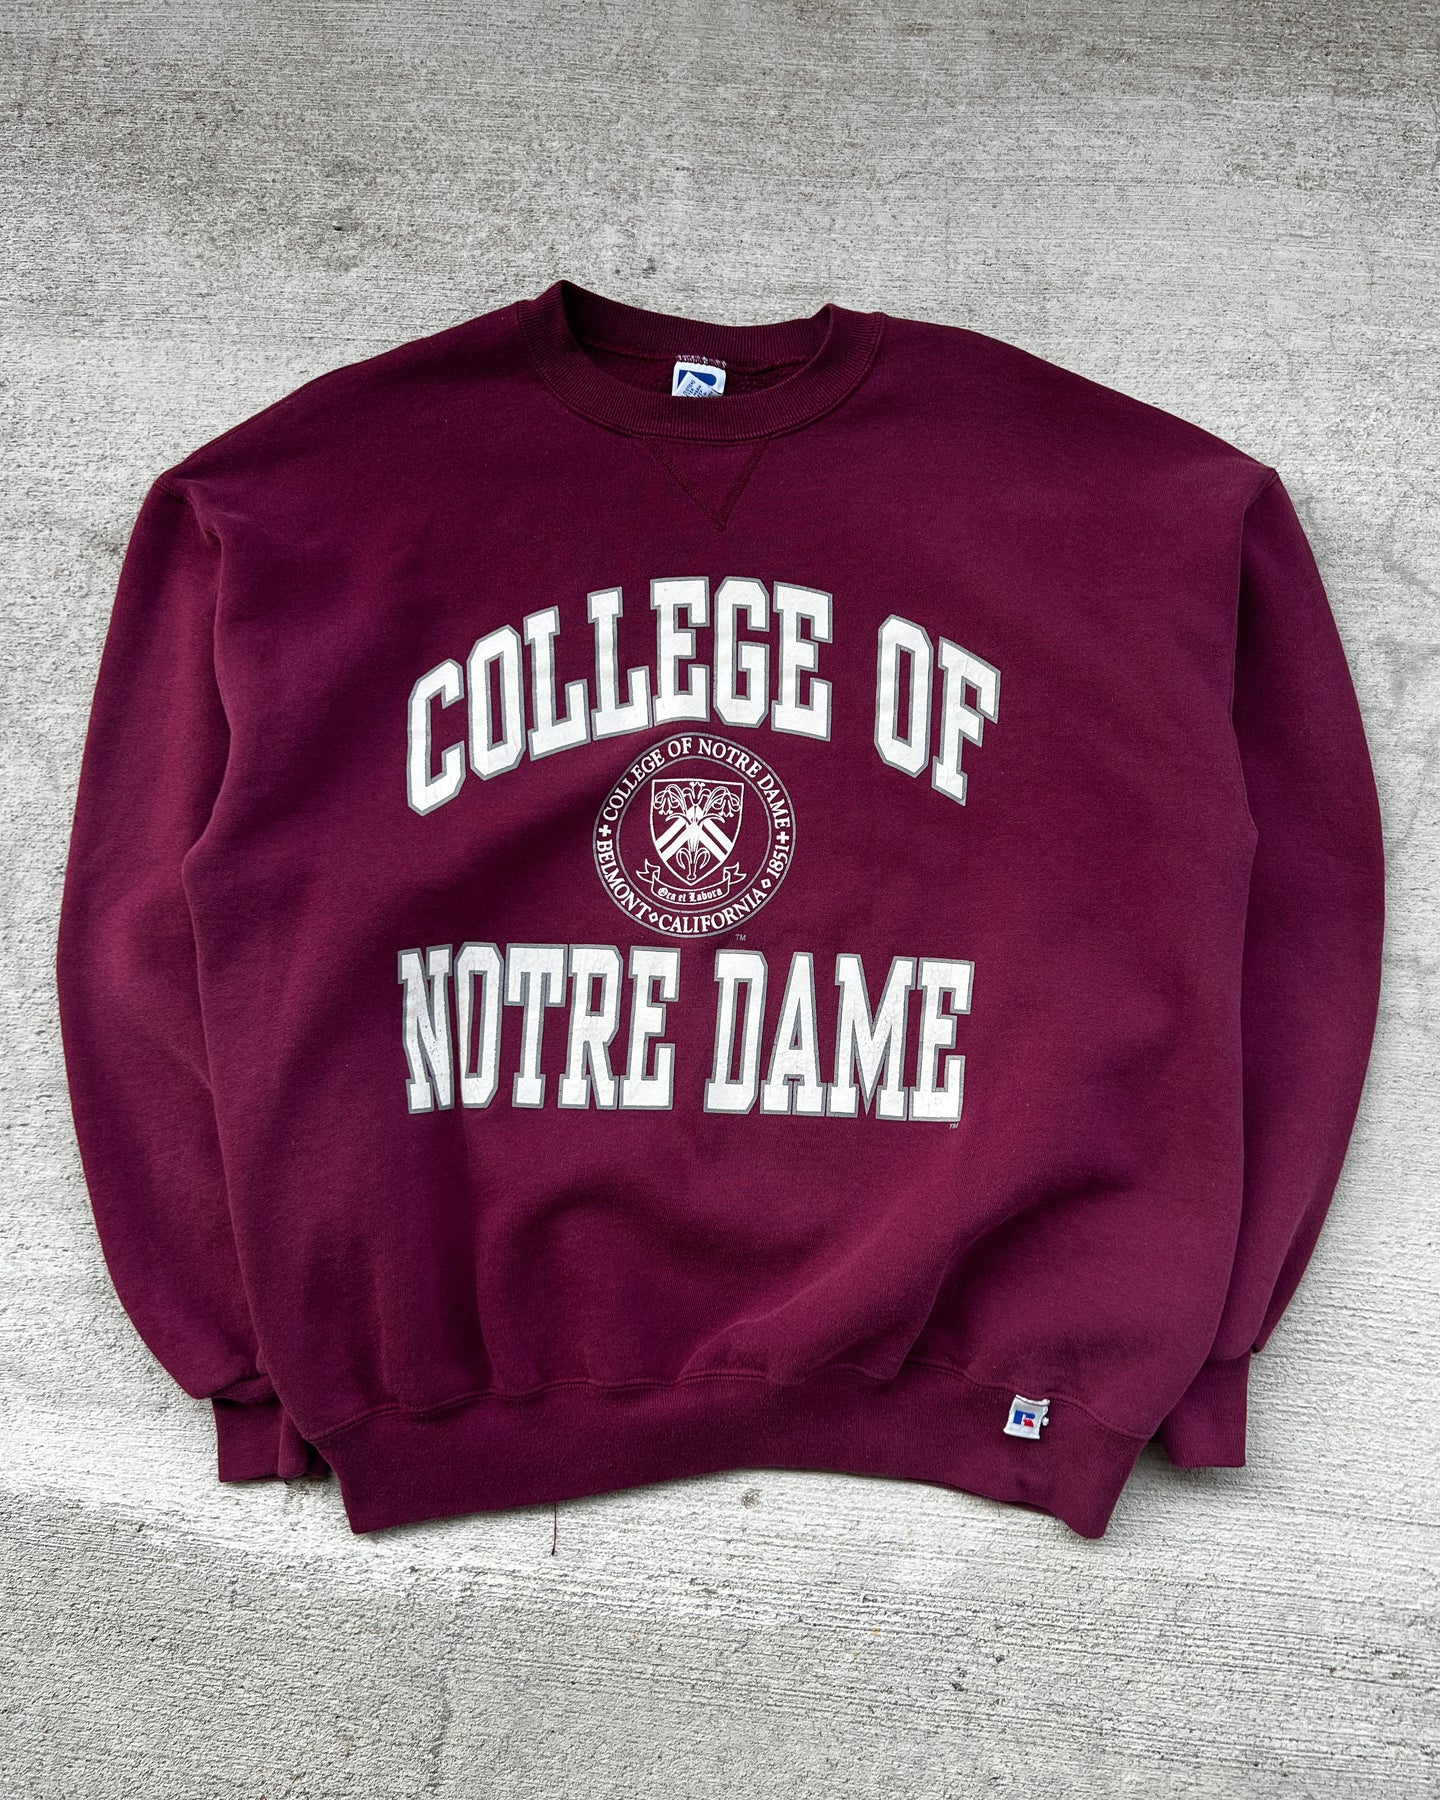 1990s Russell Notre Dame Crewneck - Size X-Large